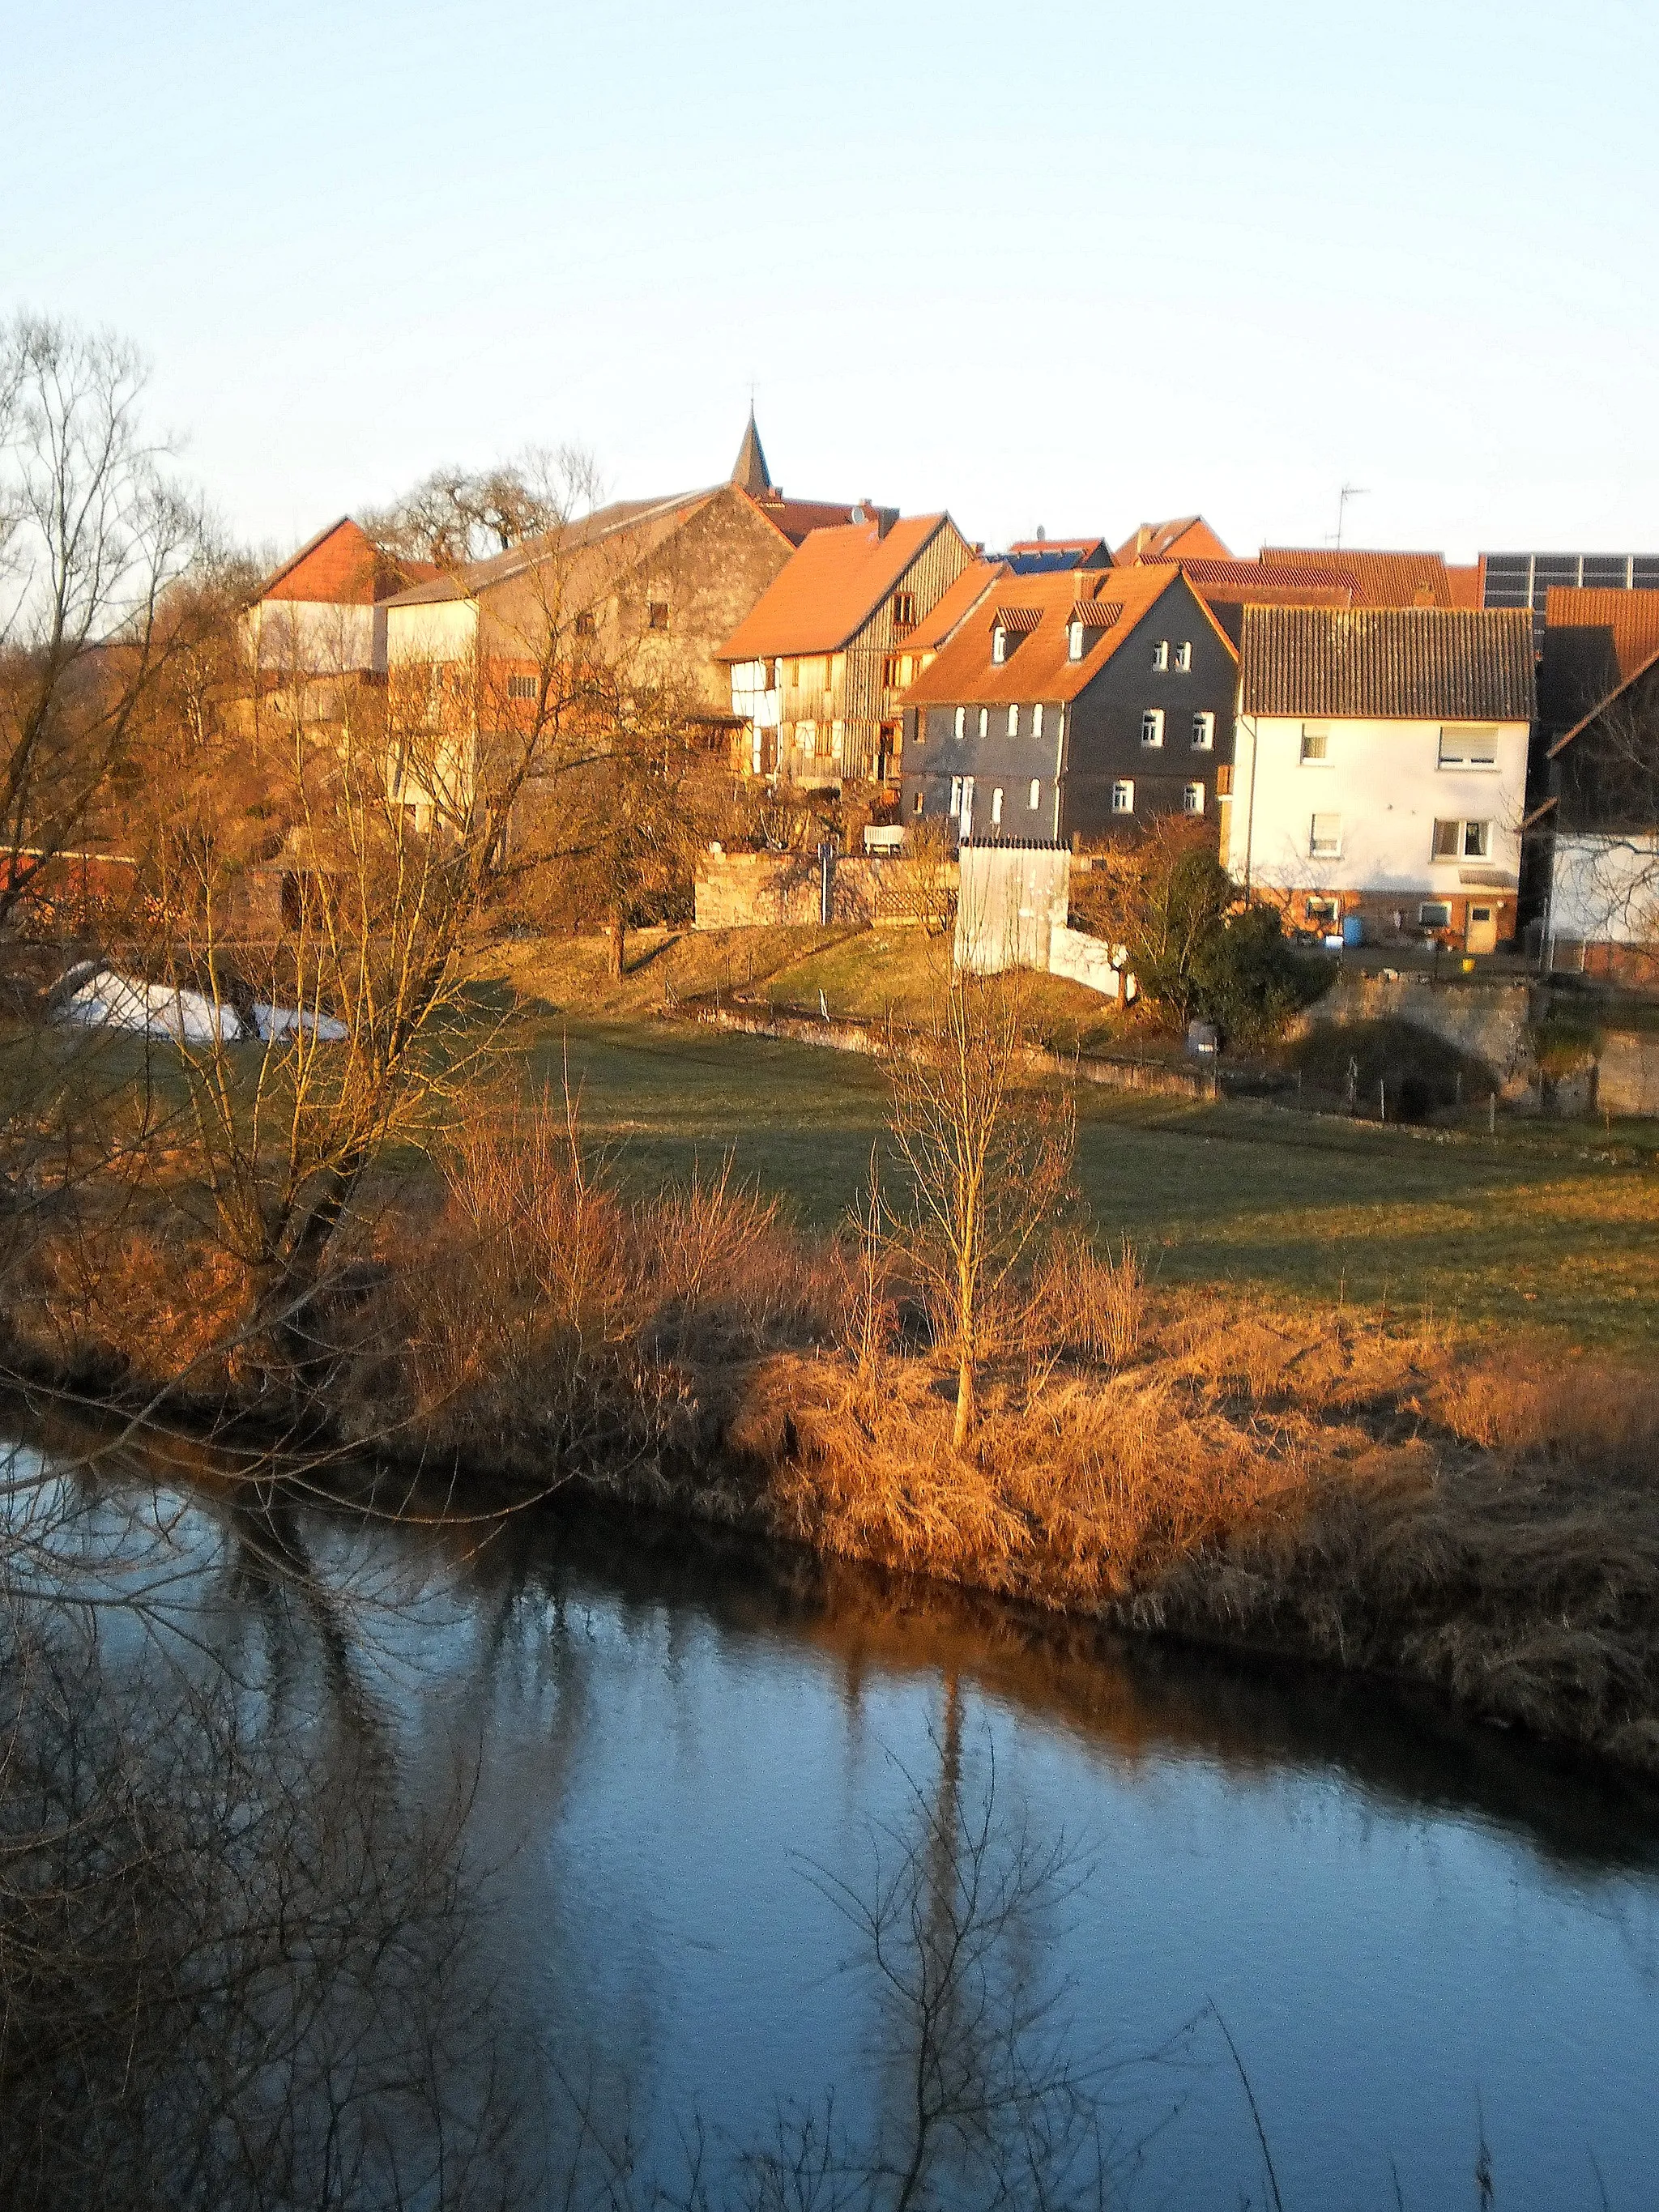 Photo showing: The village Bellnhausen, a part of Fronhausen at the river Lahn in early spring.